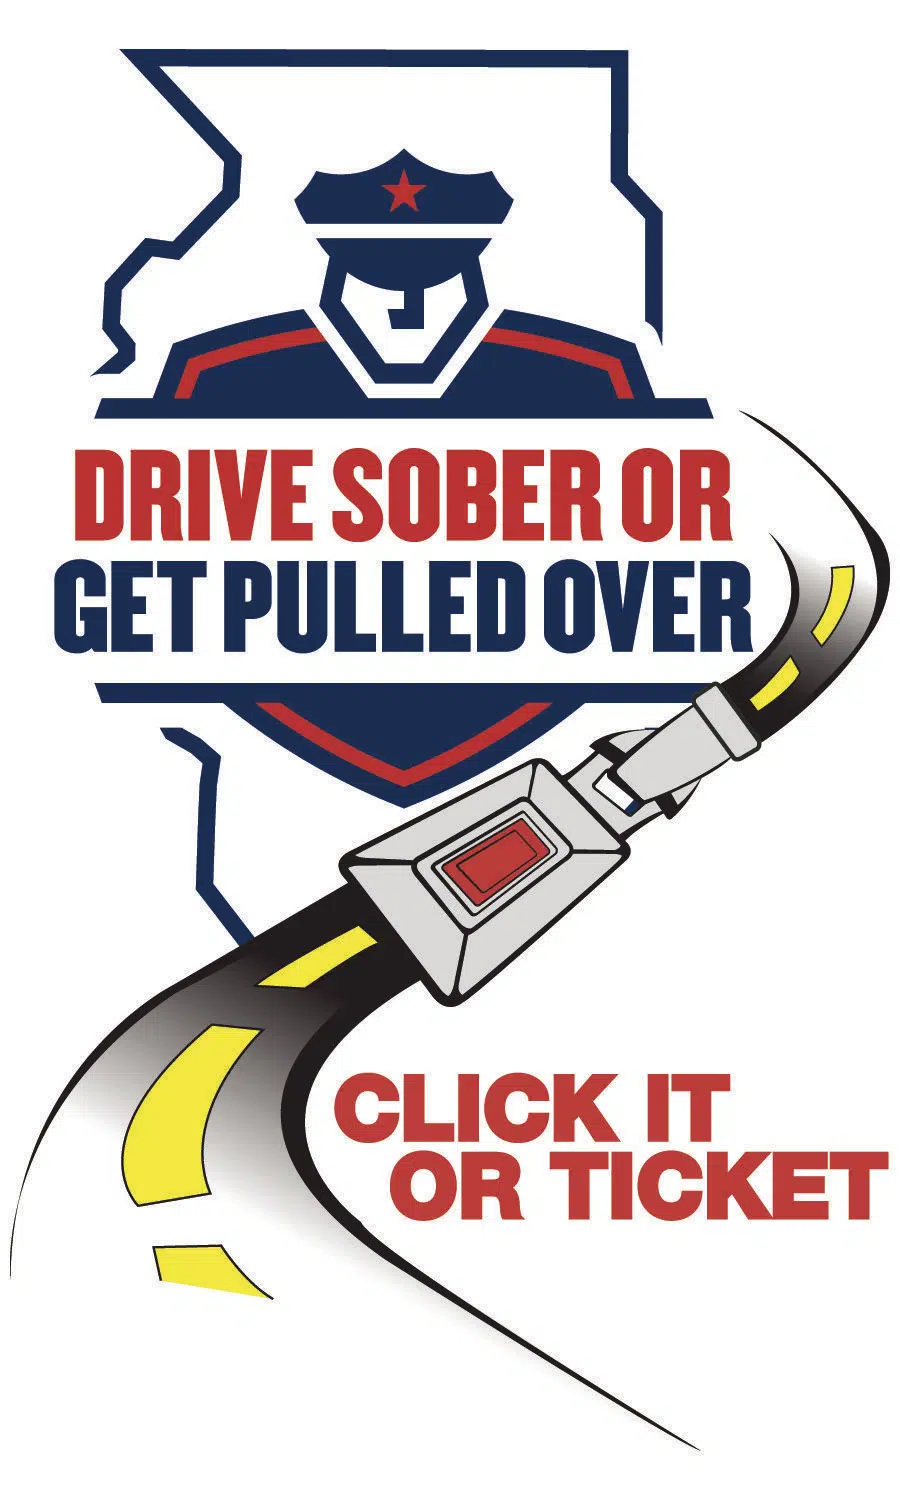 The Decatur Police Department Announces Labor Day Drive Sober or Get Pulled Over Campaign Results